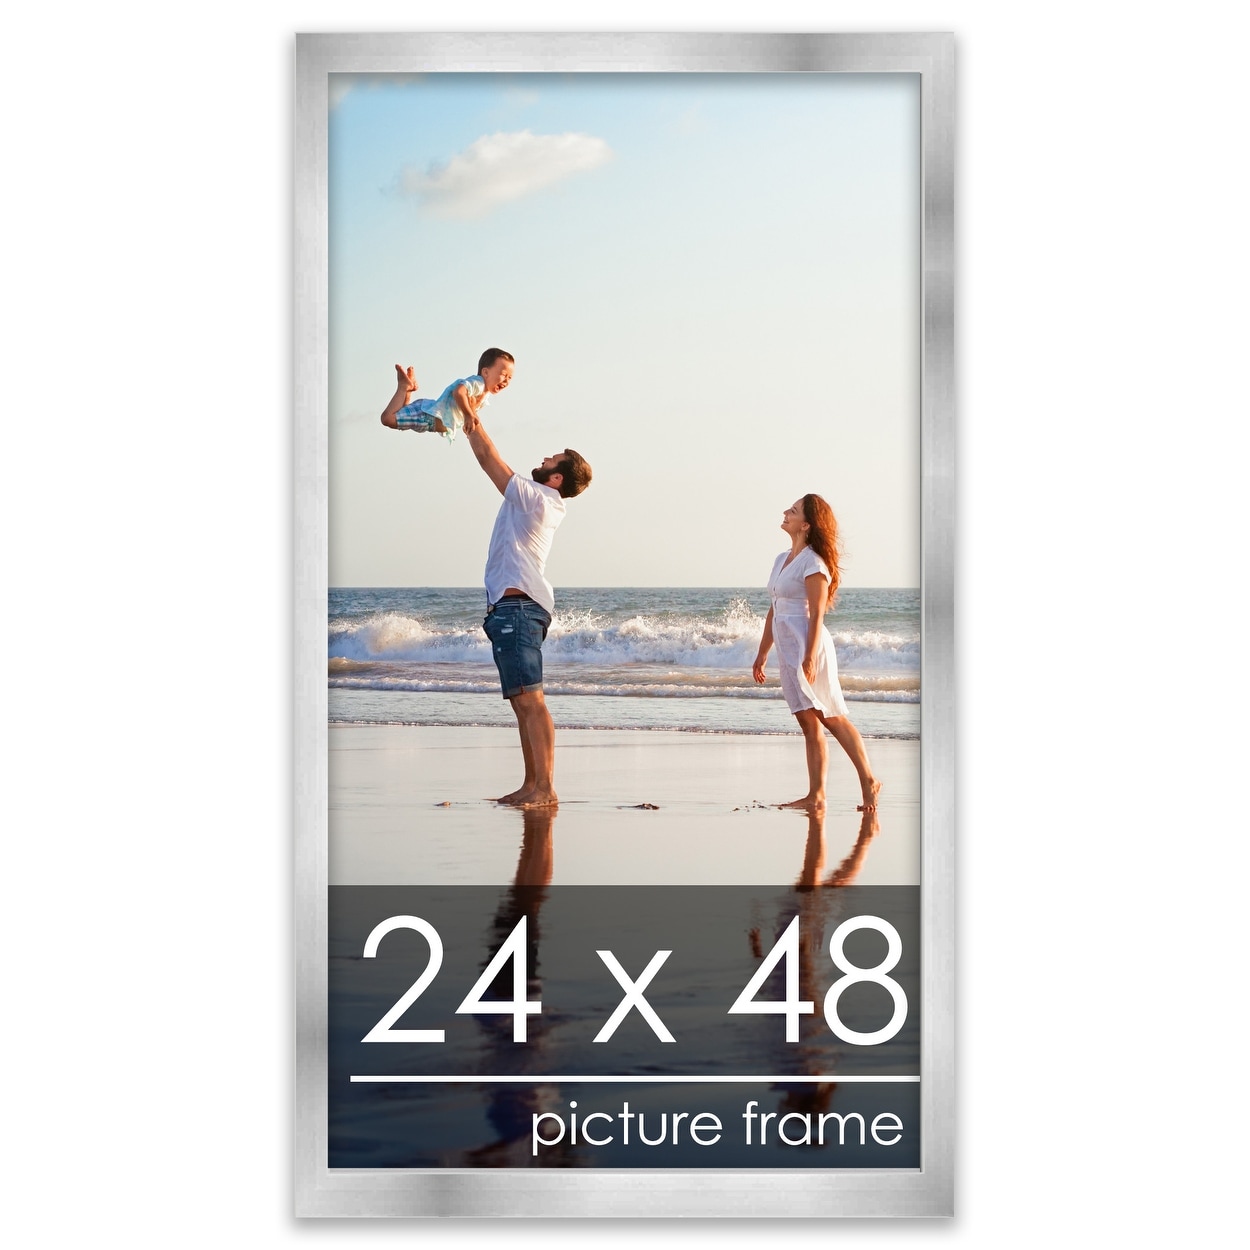 18x24 Frame with Mat - Silver 22x28 Frame Wood Made to Display Print or  Poster Measuring 18 x 24 Inches with Black Photo Mat